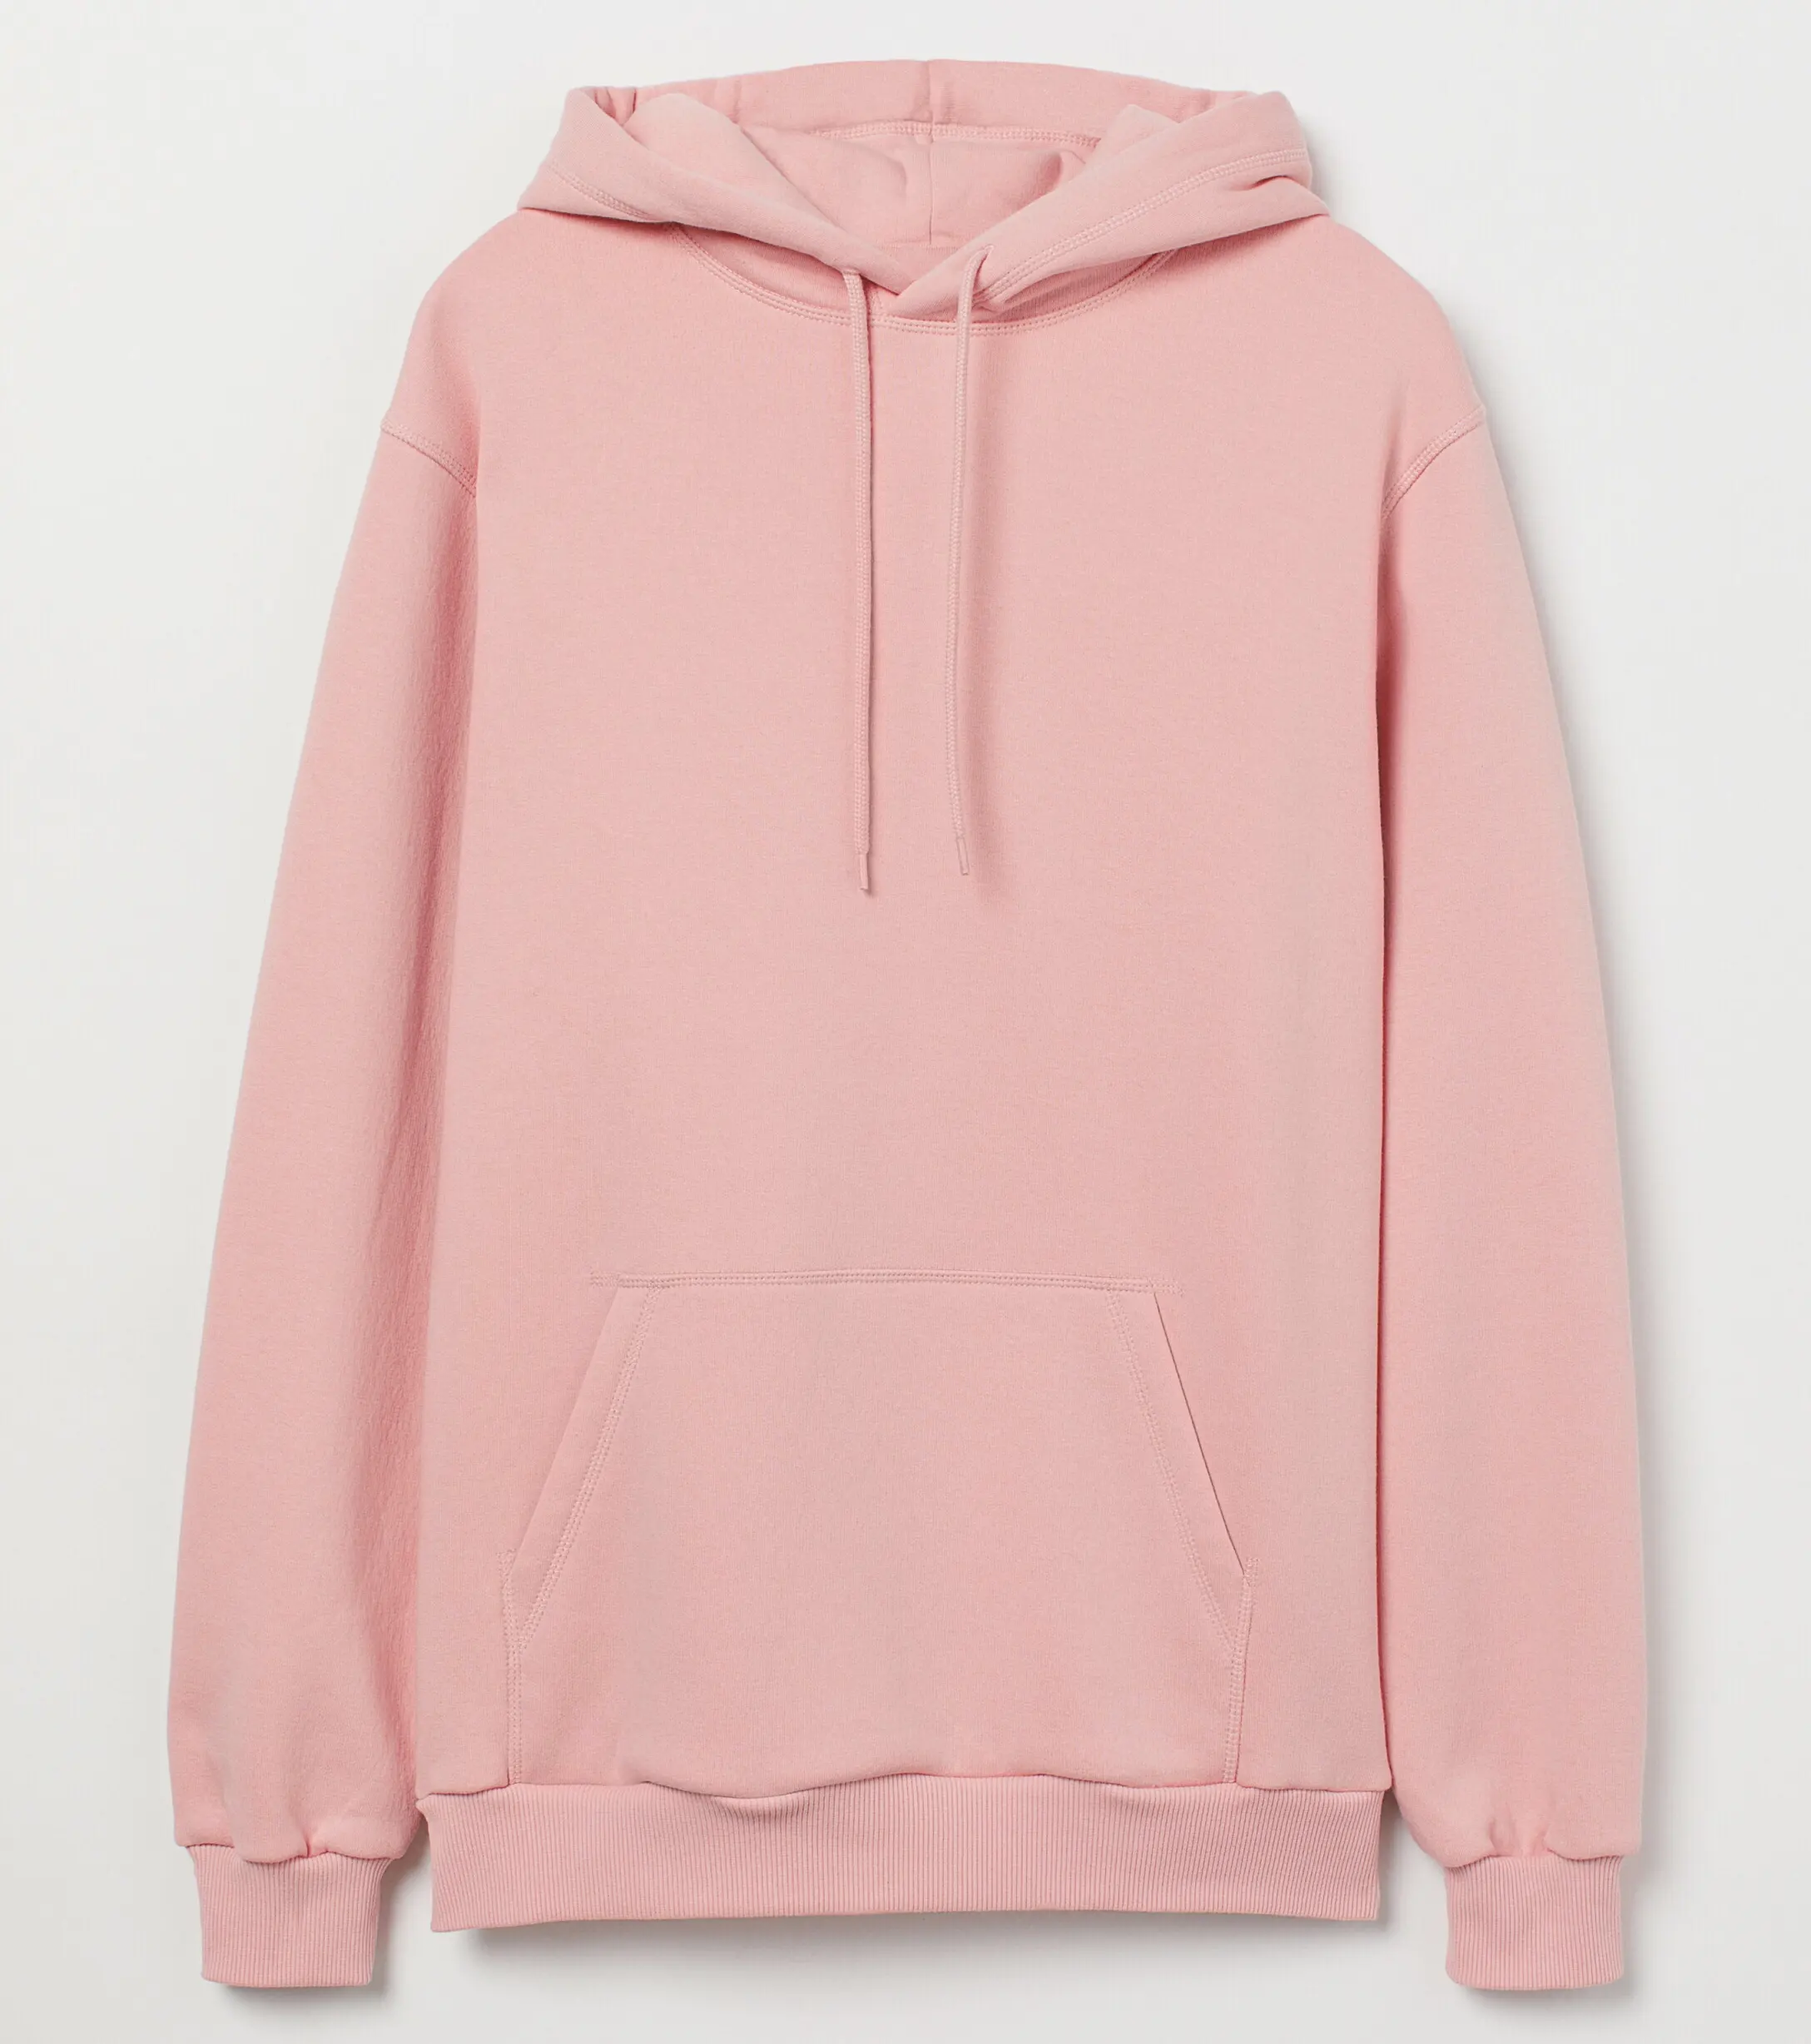 wholesale hot sale high quality Autumn hooded hoodies custom 100% Cotton pink hoodie for men